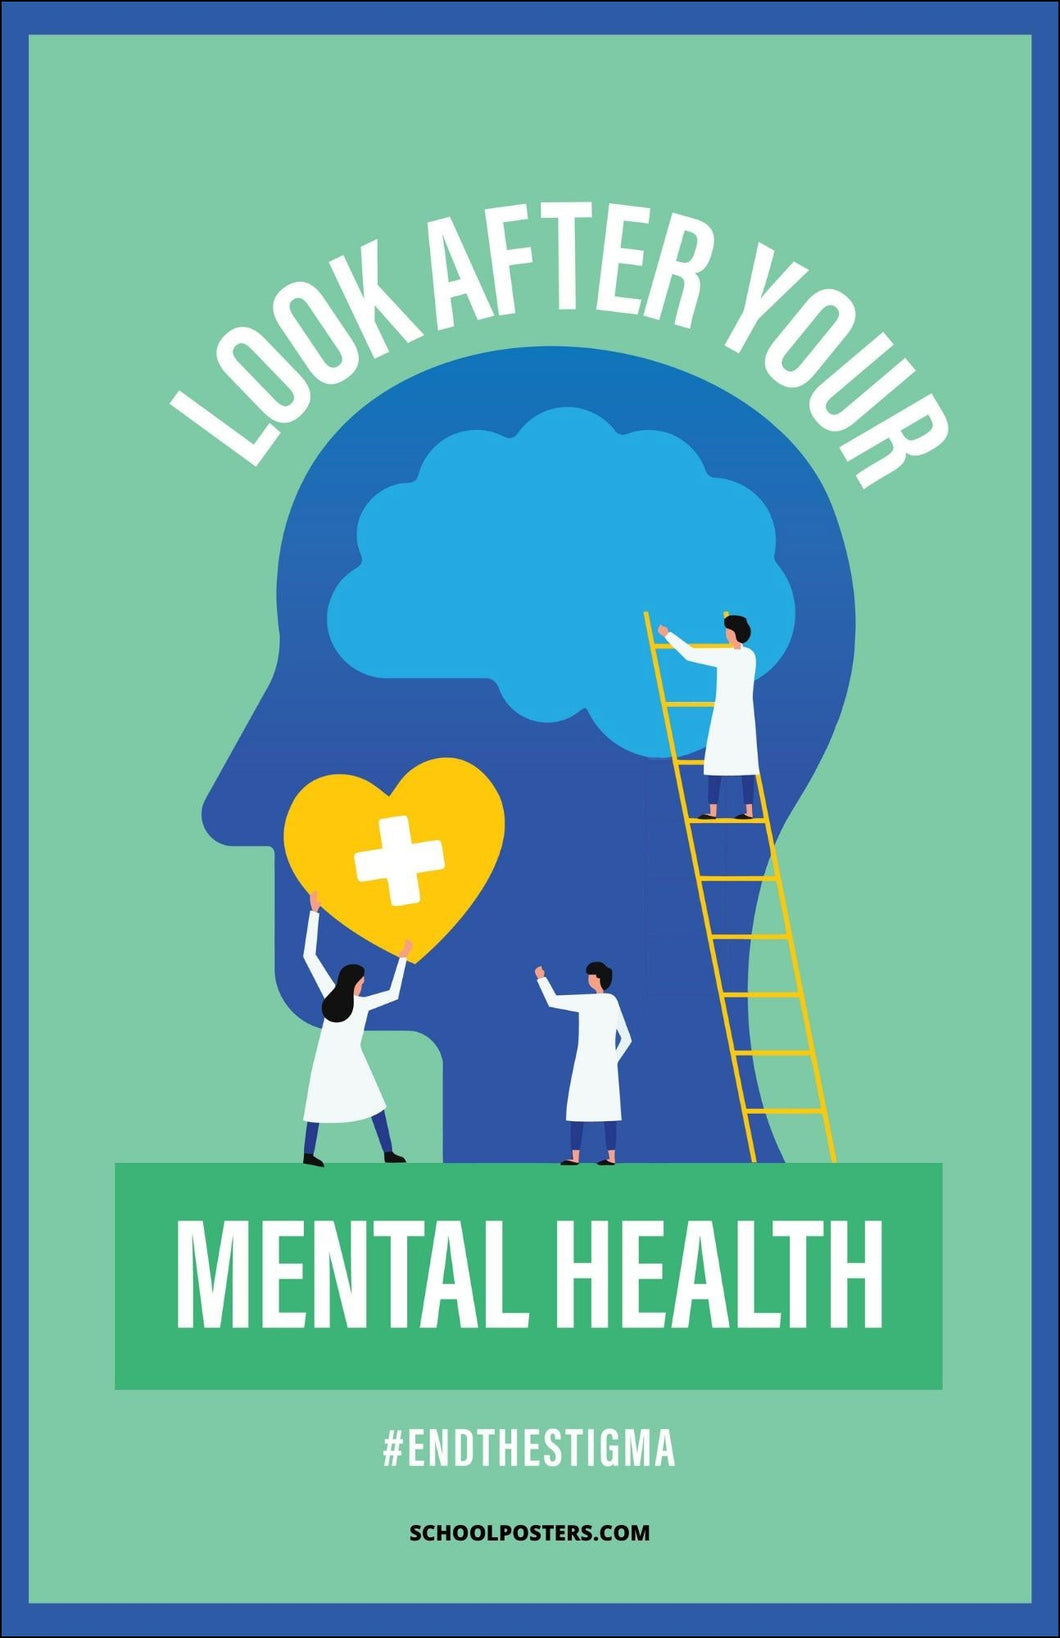 Look After Your Mental Health Poster